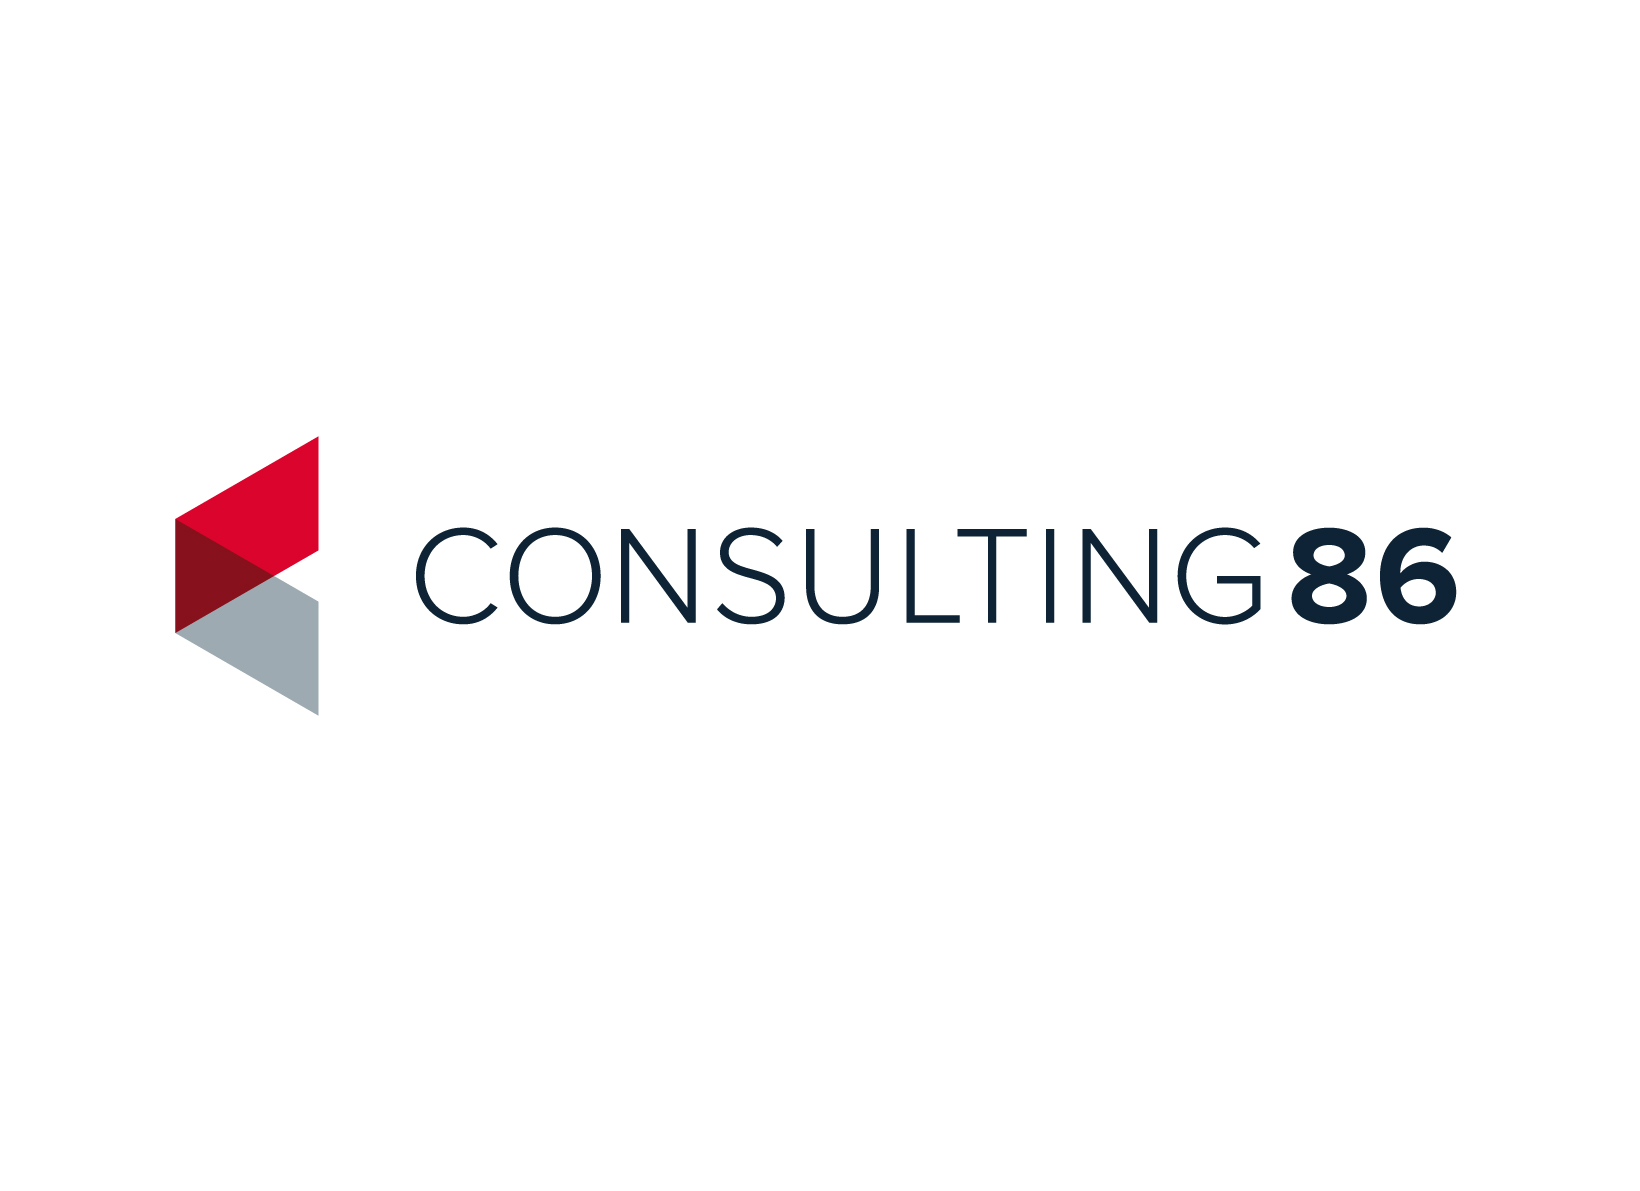 Consulting 86 GmbH